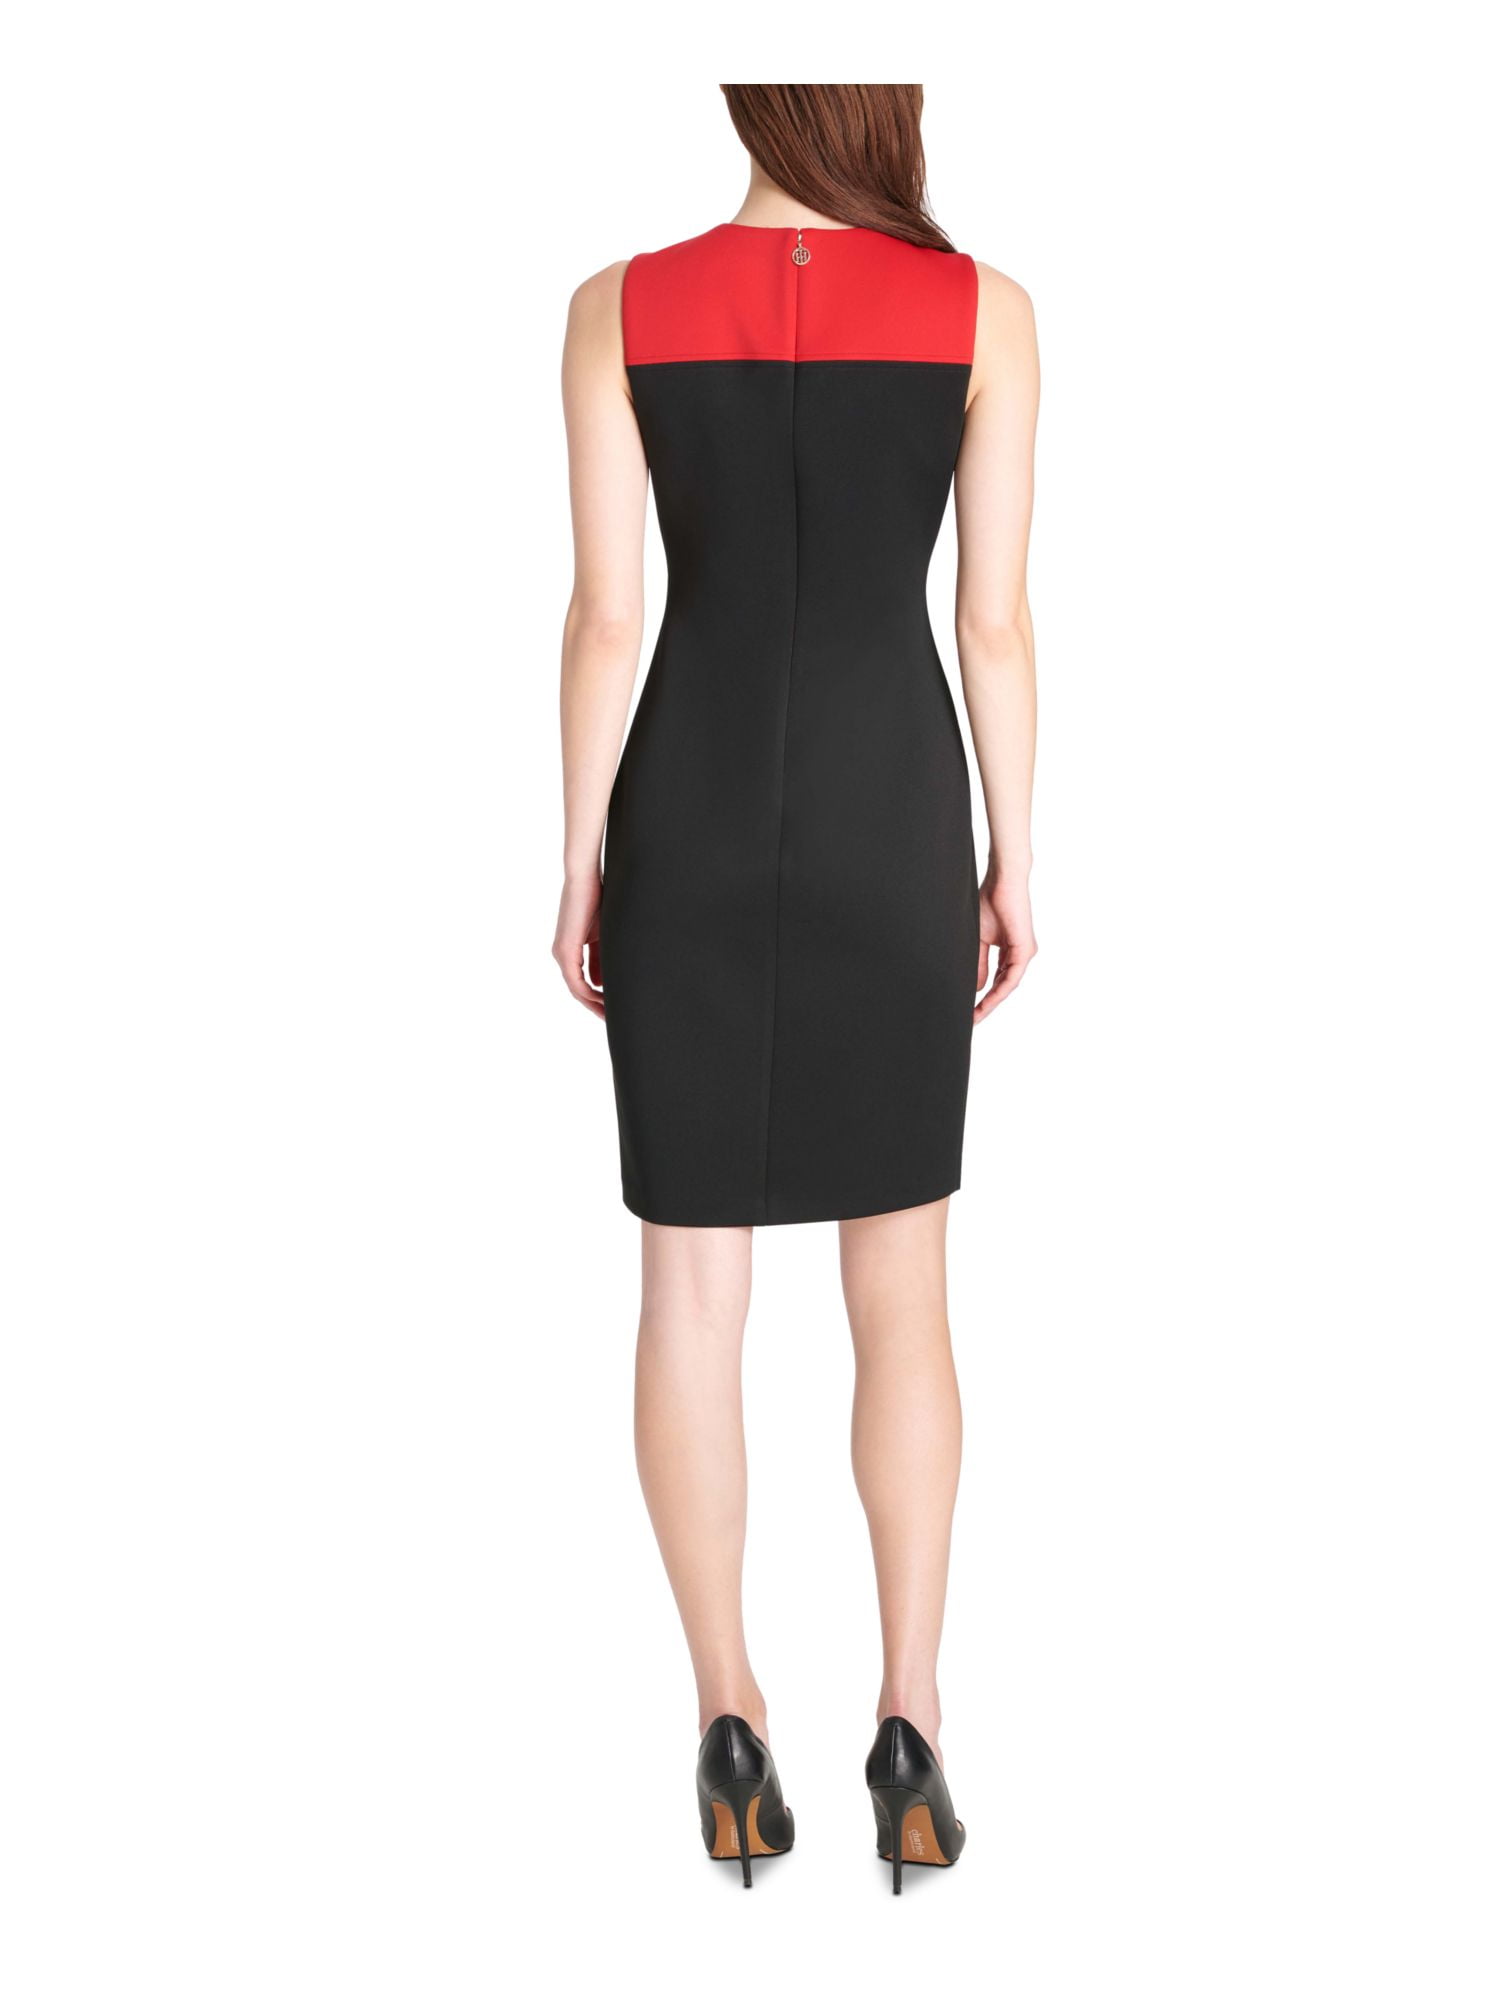 Tommy Hilfiger Womens Embellished Colorblock and Party Dress 2 - Walmart.com